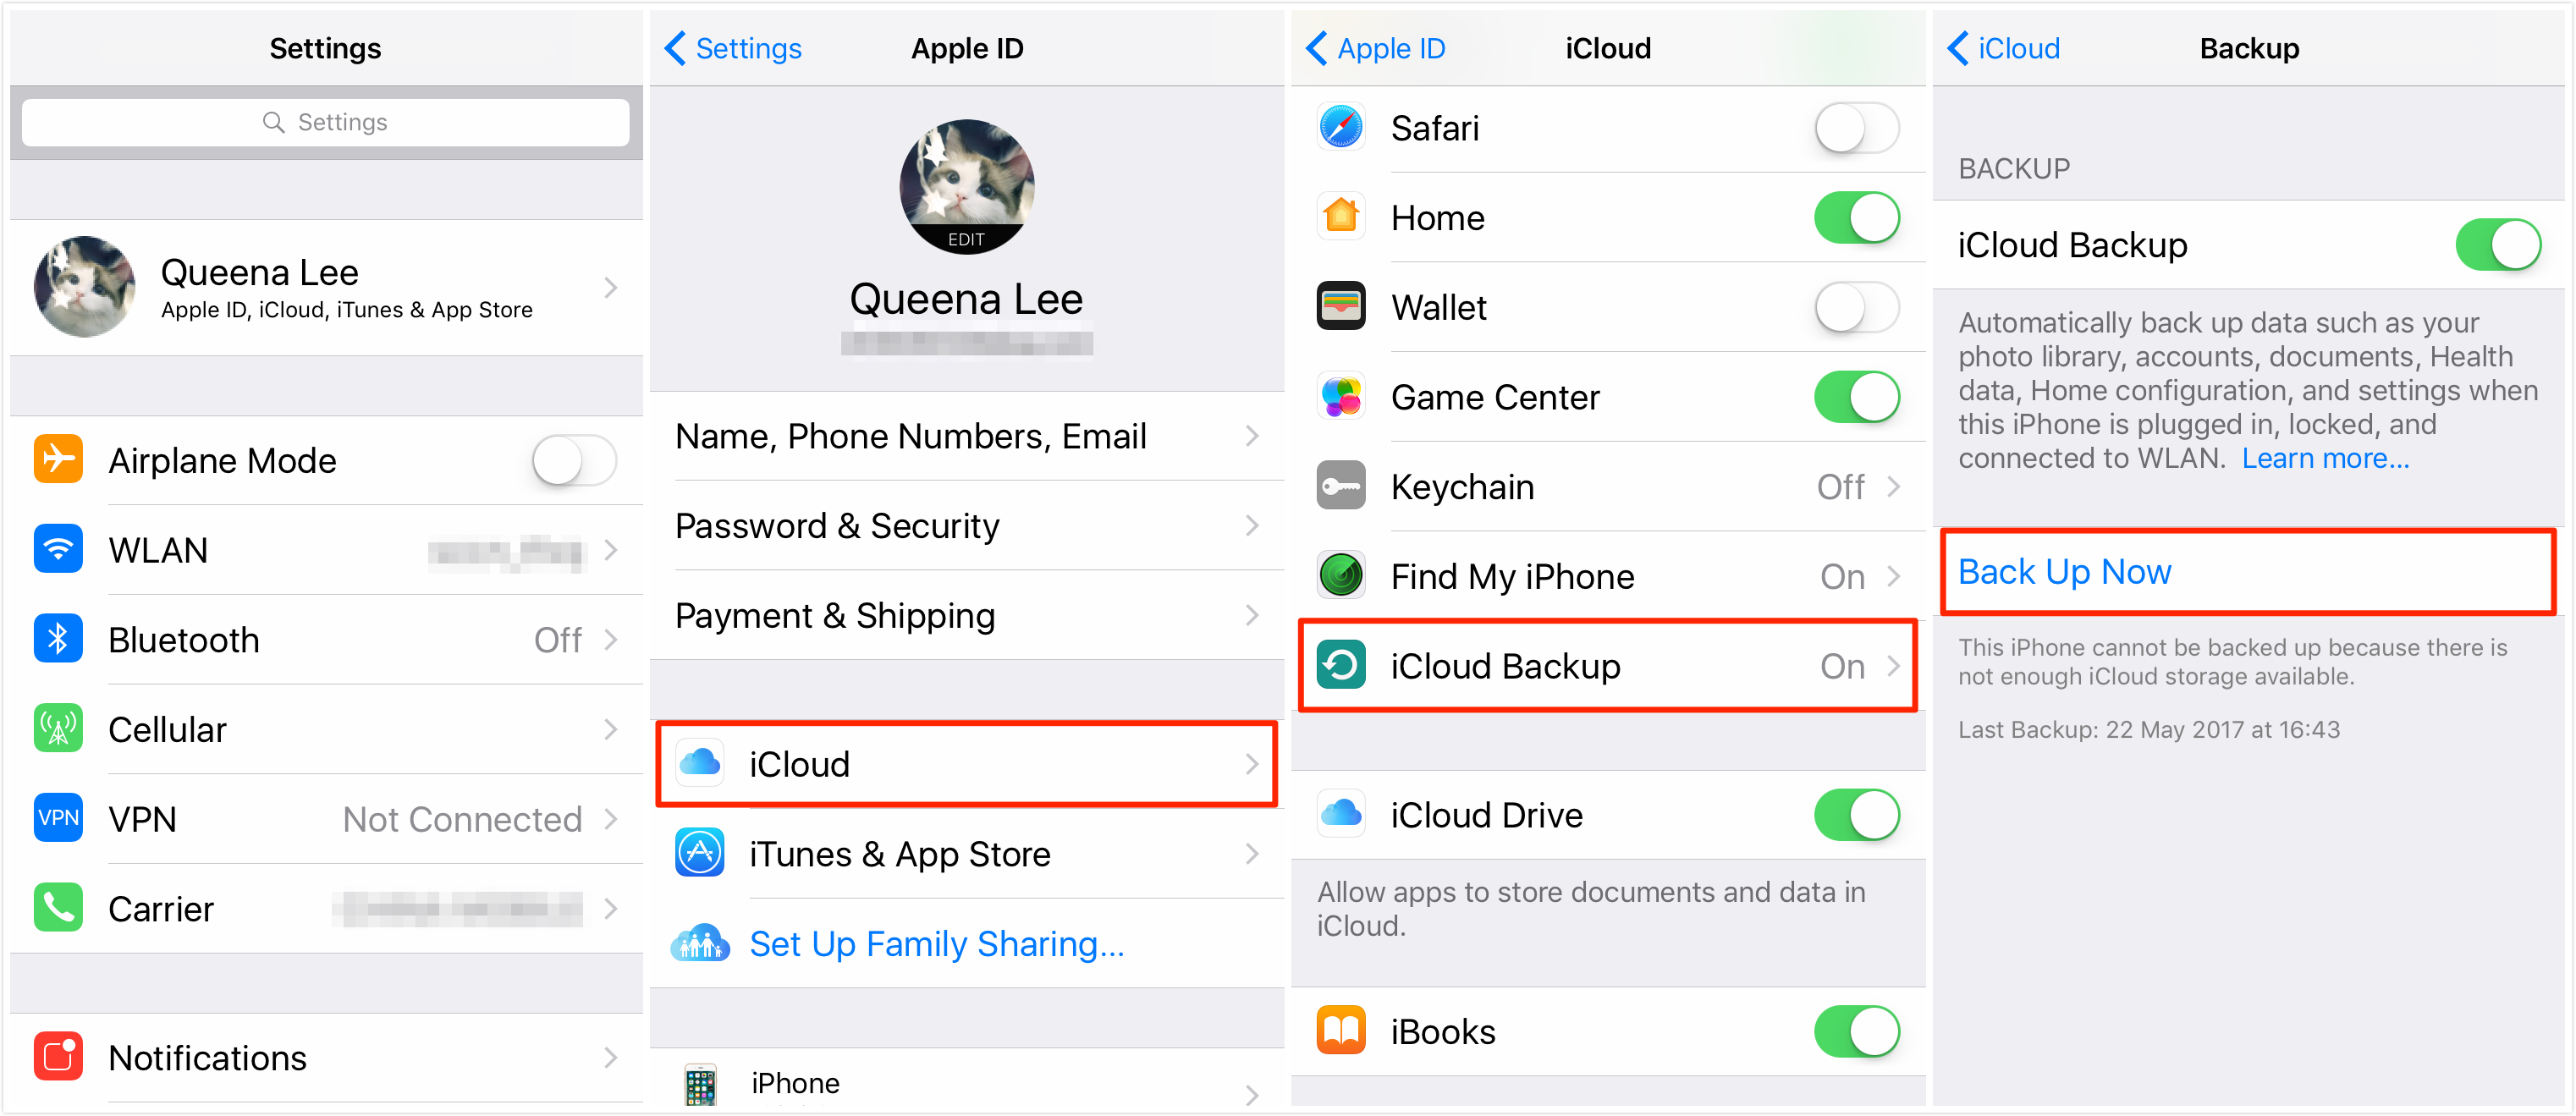 How to Backup iPhone 6/6s/4/4s/5/5s/5c/SE/7/8/X to iCloud